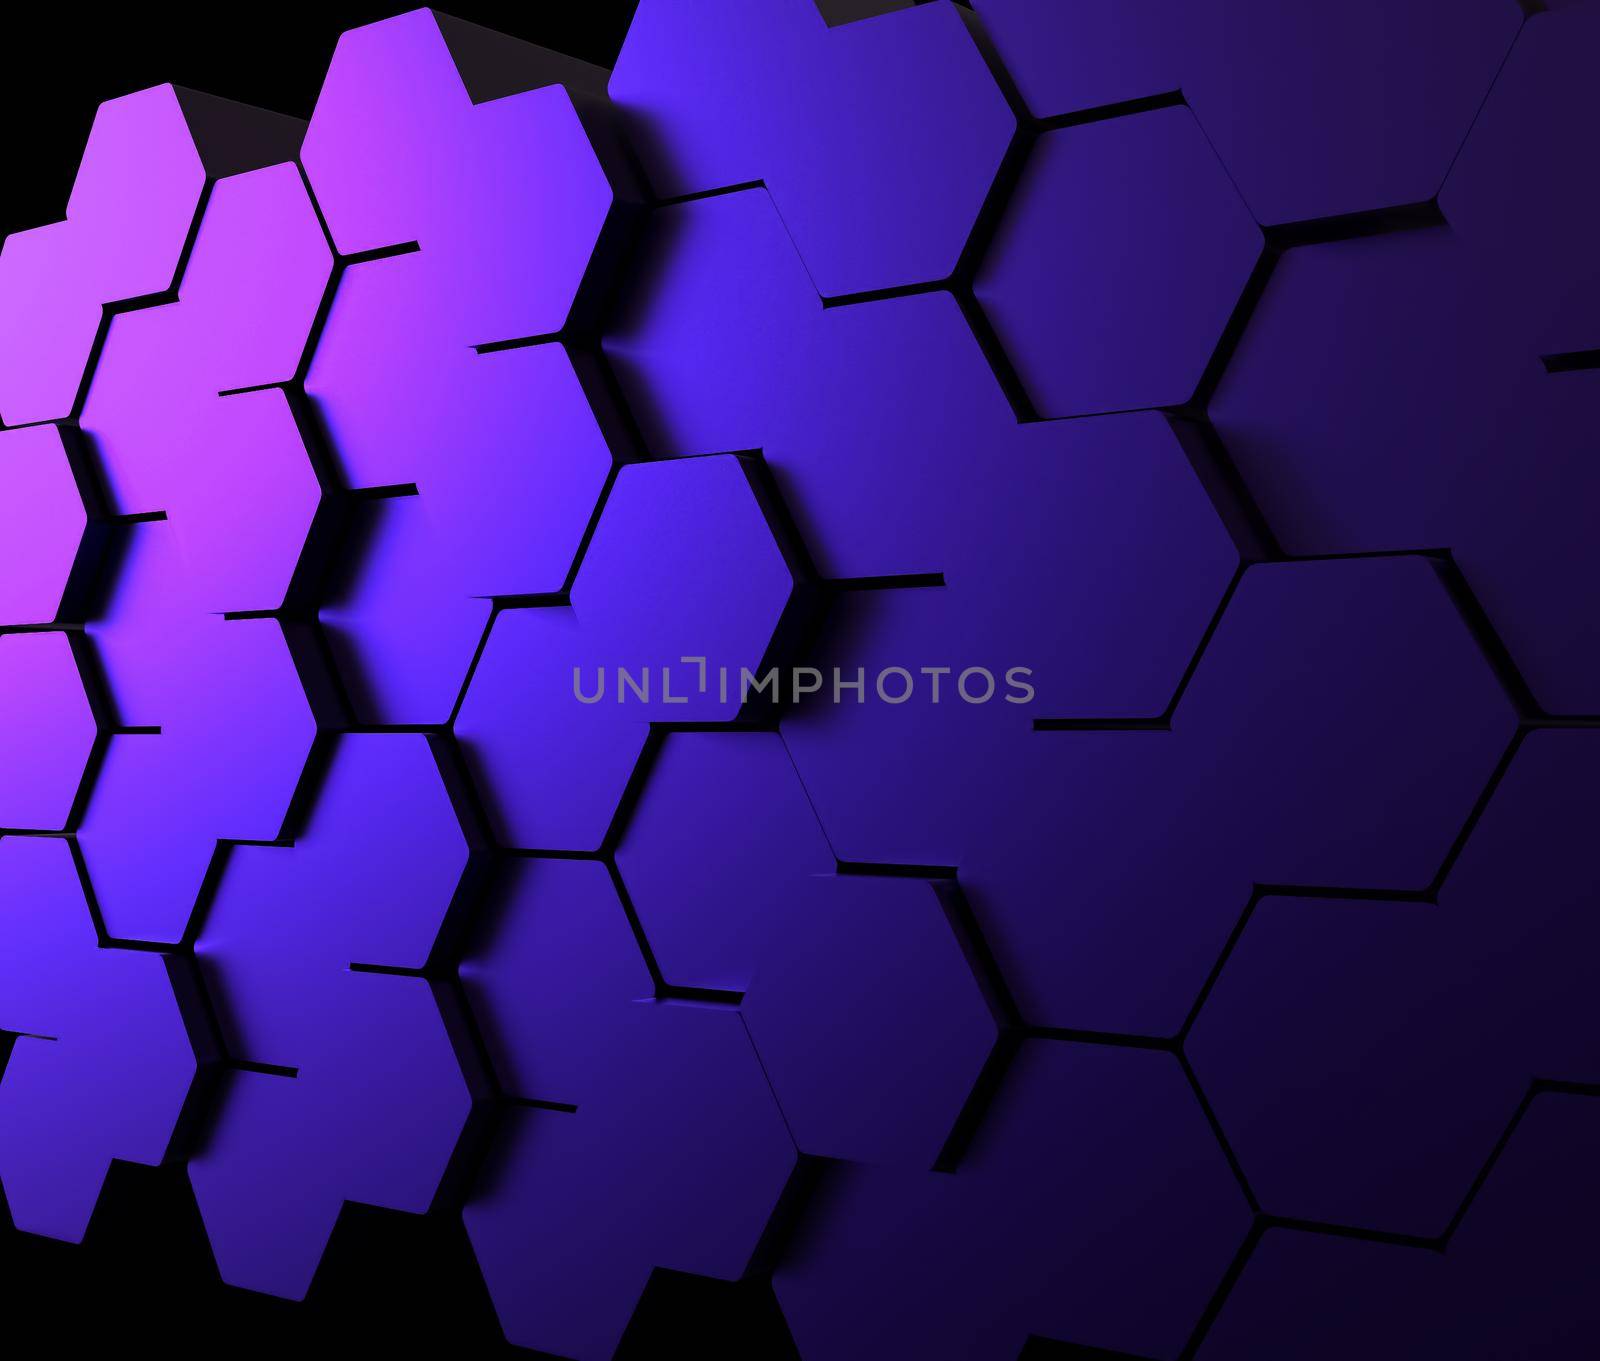 Abstract purple and blue retro neon hexagonal background. Futuristic technology concept. 3d rendering illustration. Wall hex geometry pattern. Carbon cells. Polygonal dark surface. Polished mosaic